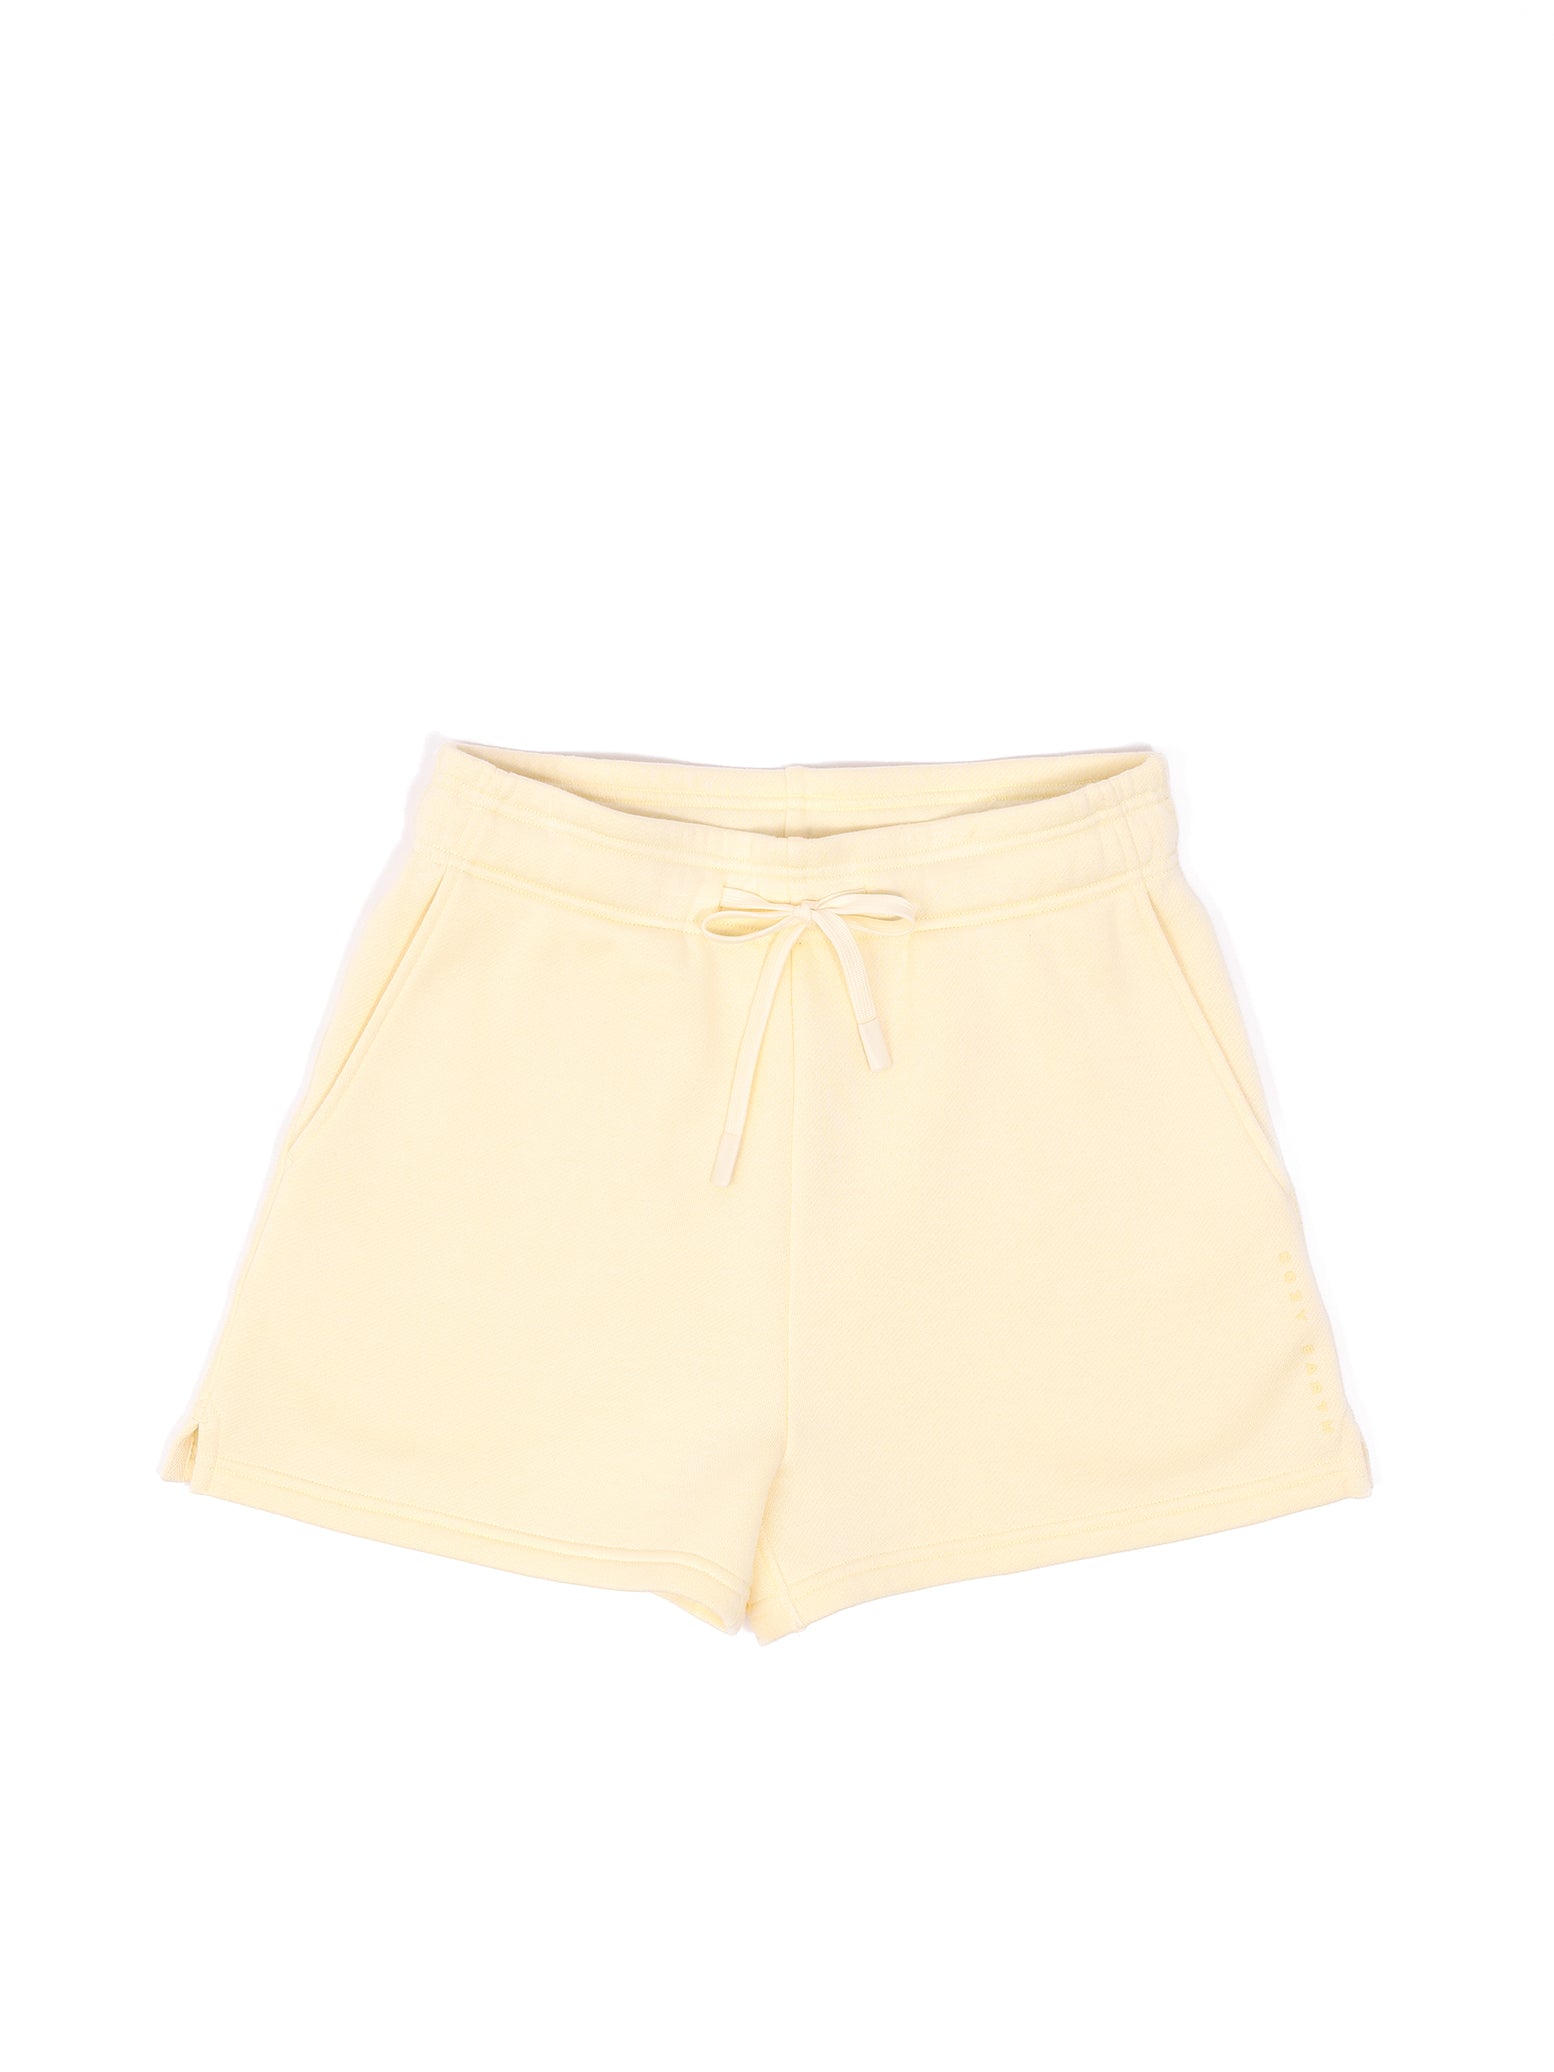 Lemonade CityScape Shorts. The shorts are laying flat over a background that is white. 